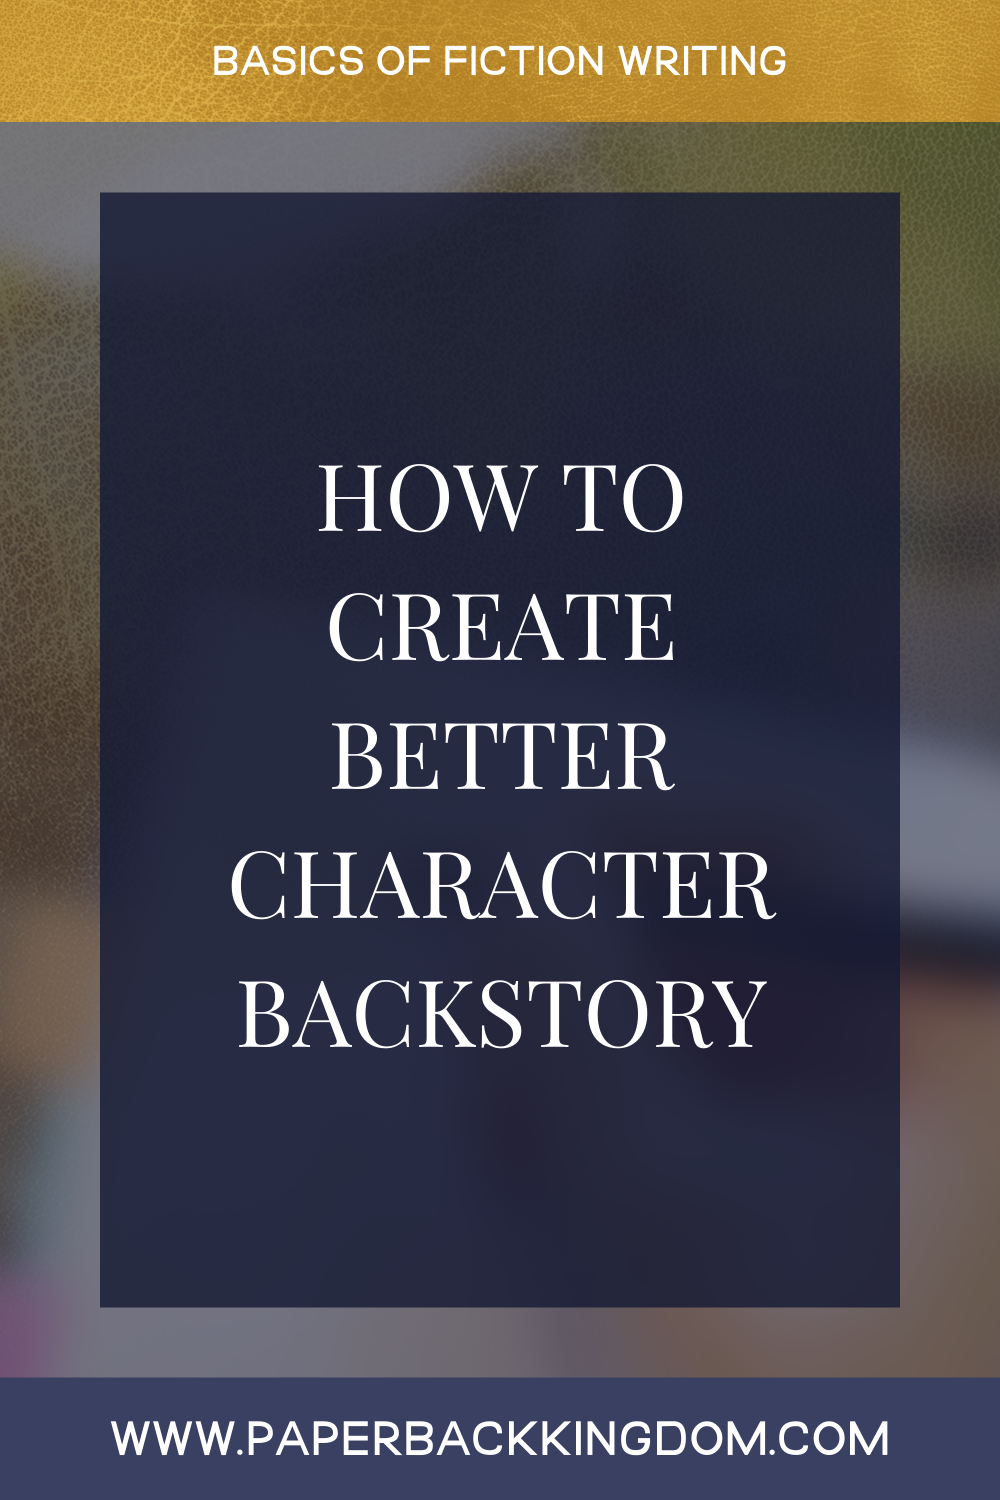 How To Create Better Character Backstory - Not only can a person's upbringing leave clues as to what that person is like, but it also helps you identify plot holes and places where your characters are 'out' of character. So today we're going to explore how to create better character backstory.